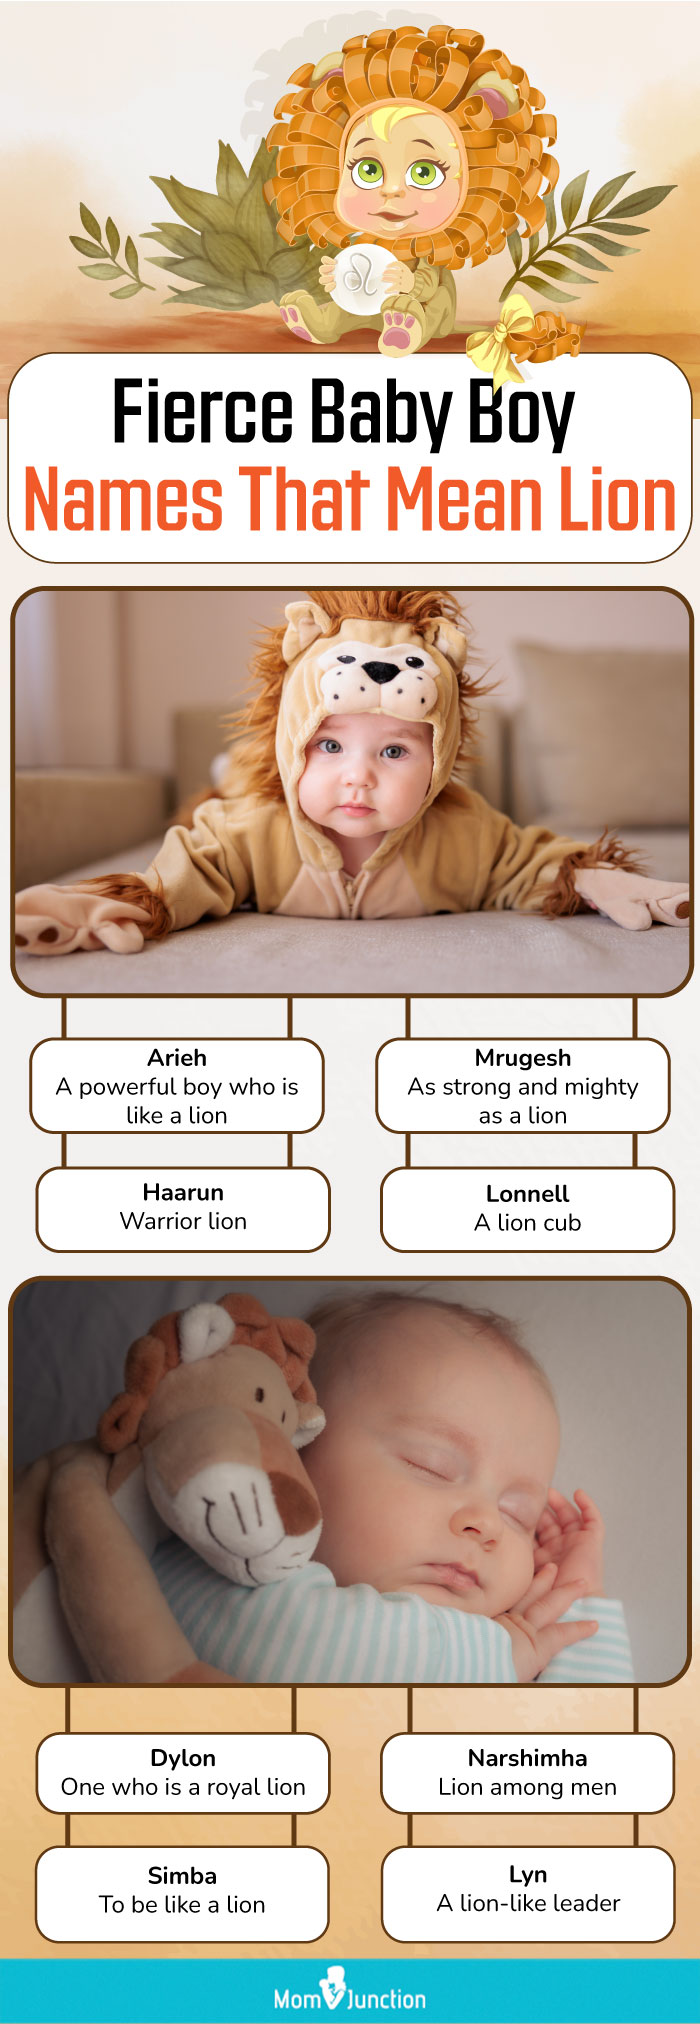 fierce baby boy names that mean lion (infographic)